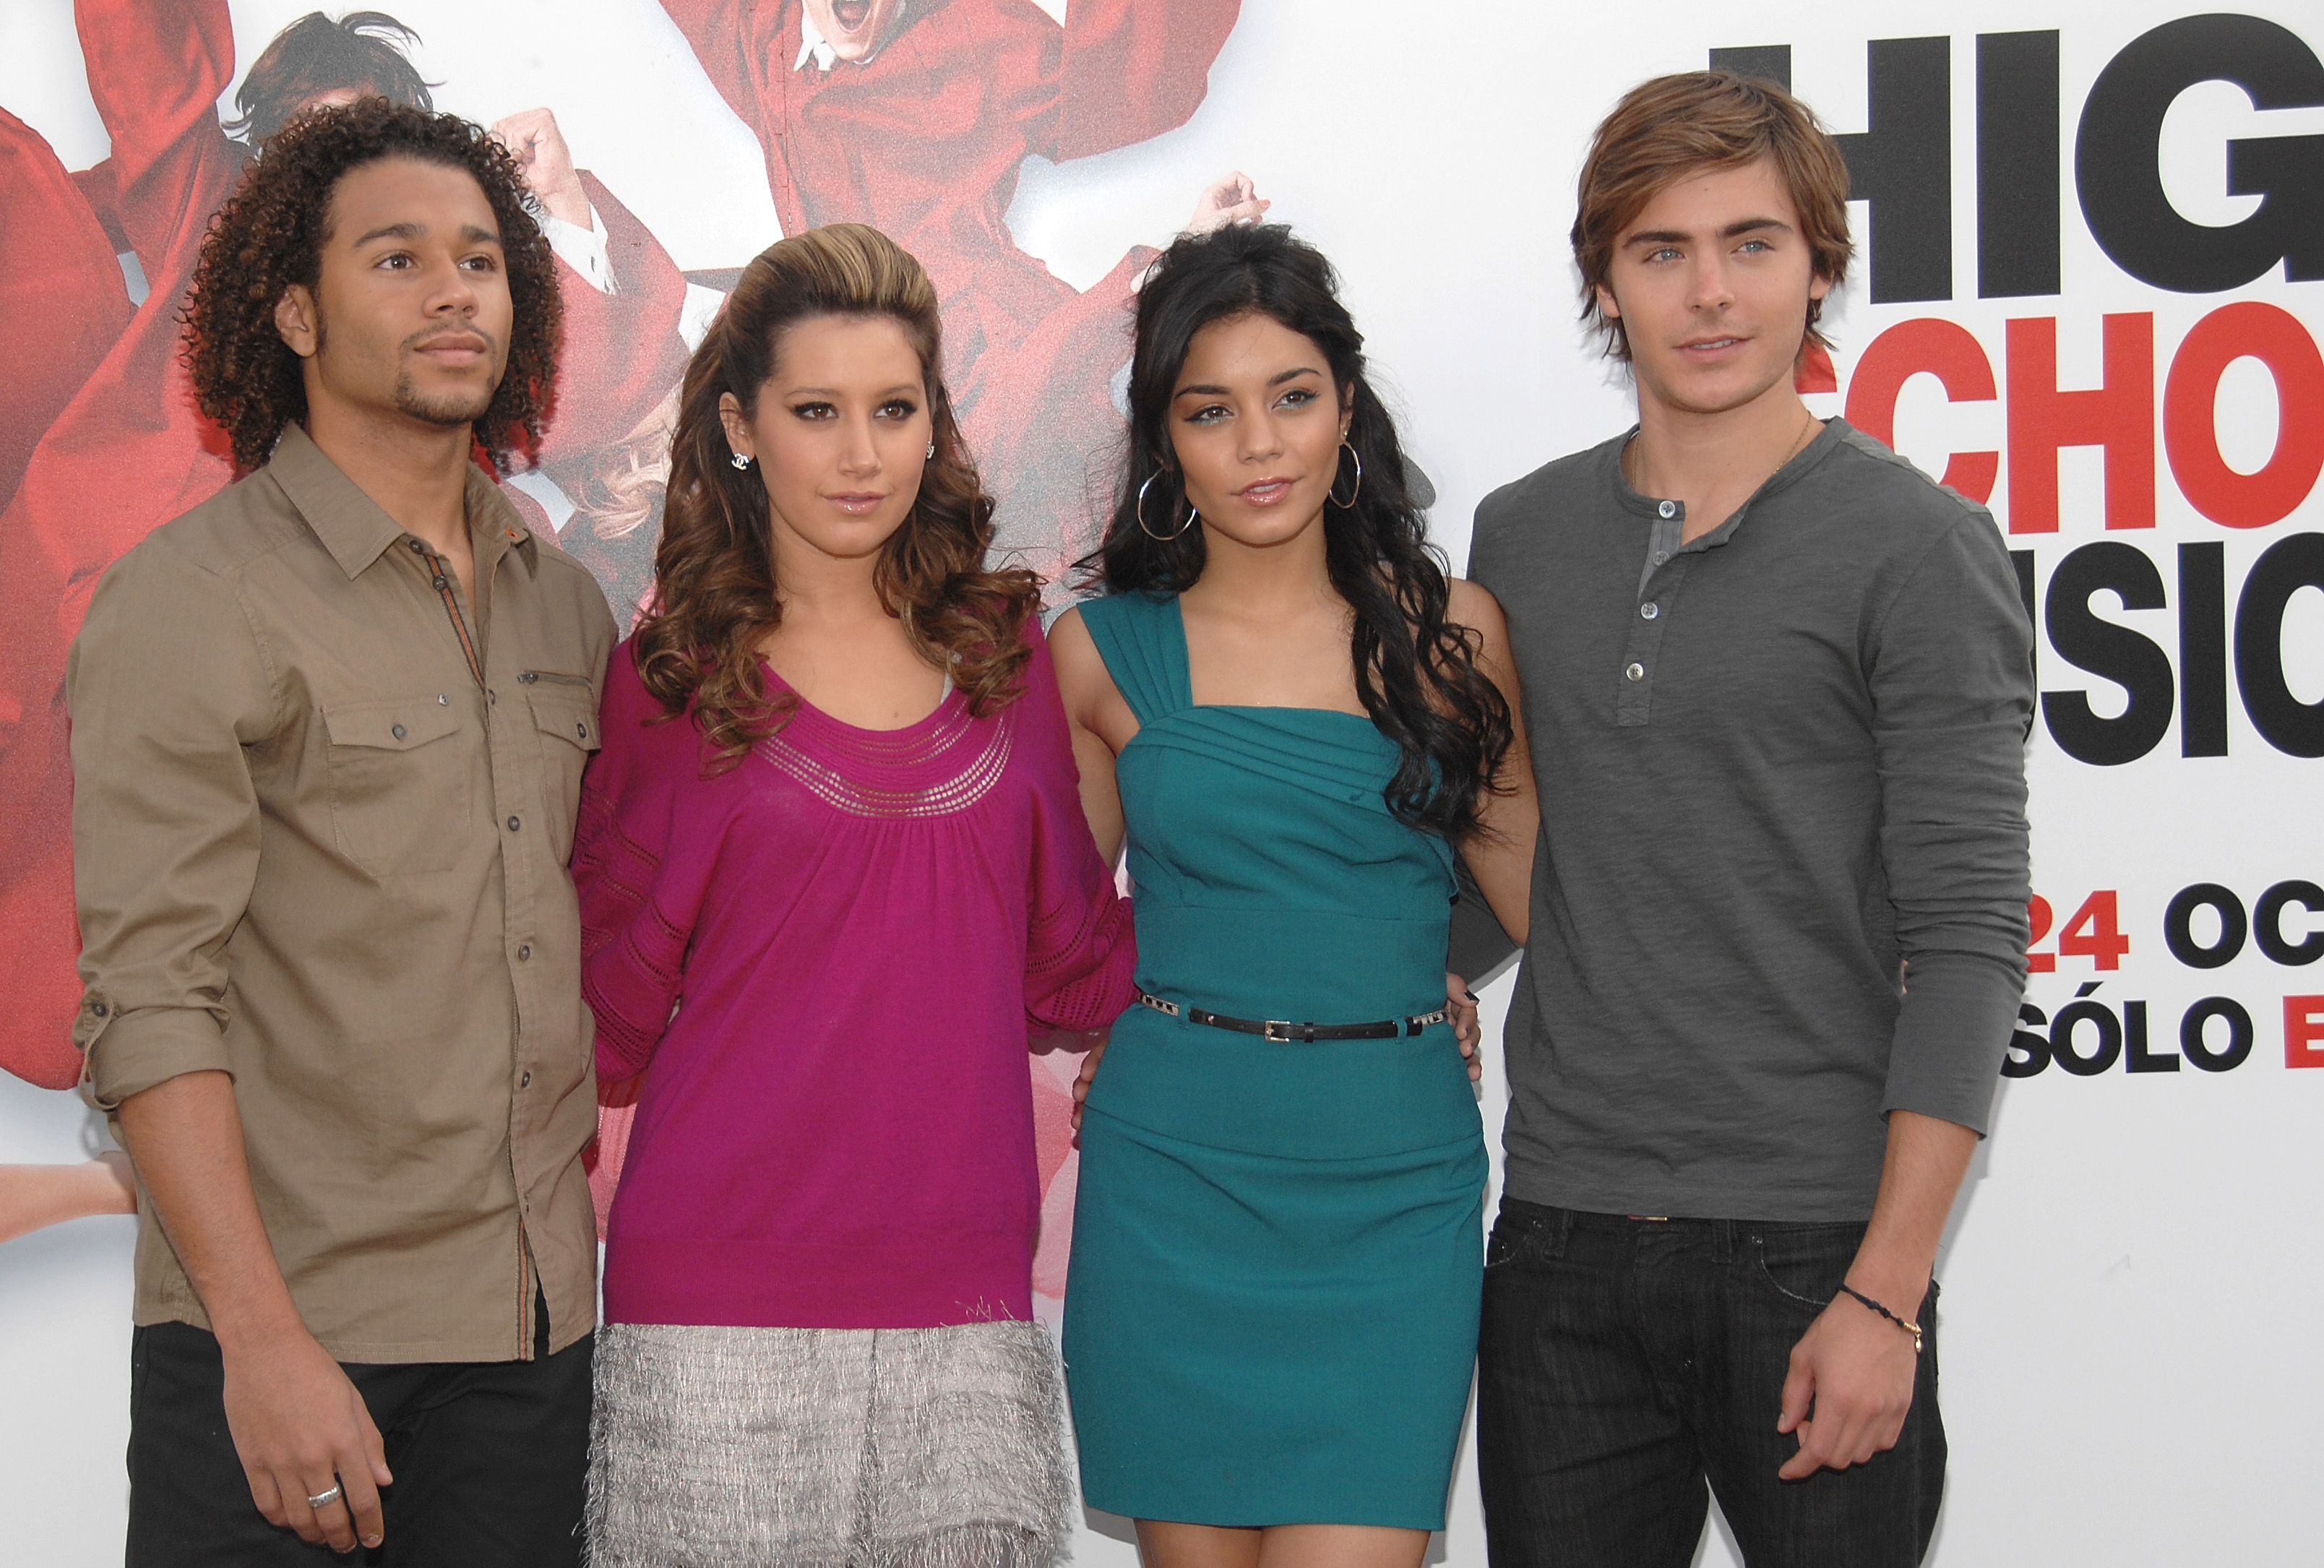 Corbin Bleu, Ashley Tisdale, Vanessa Hudgens, and Zac Efron stand together in casual outfits in front of a &quot;High School Musical&quot; poster